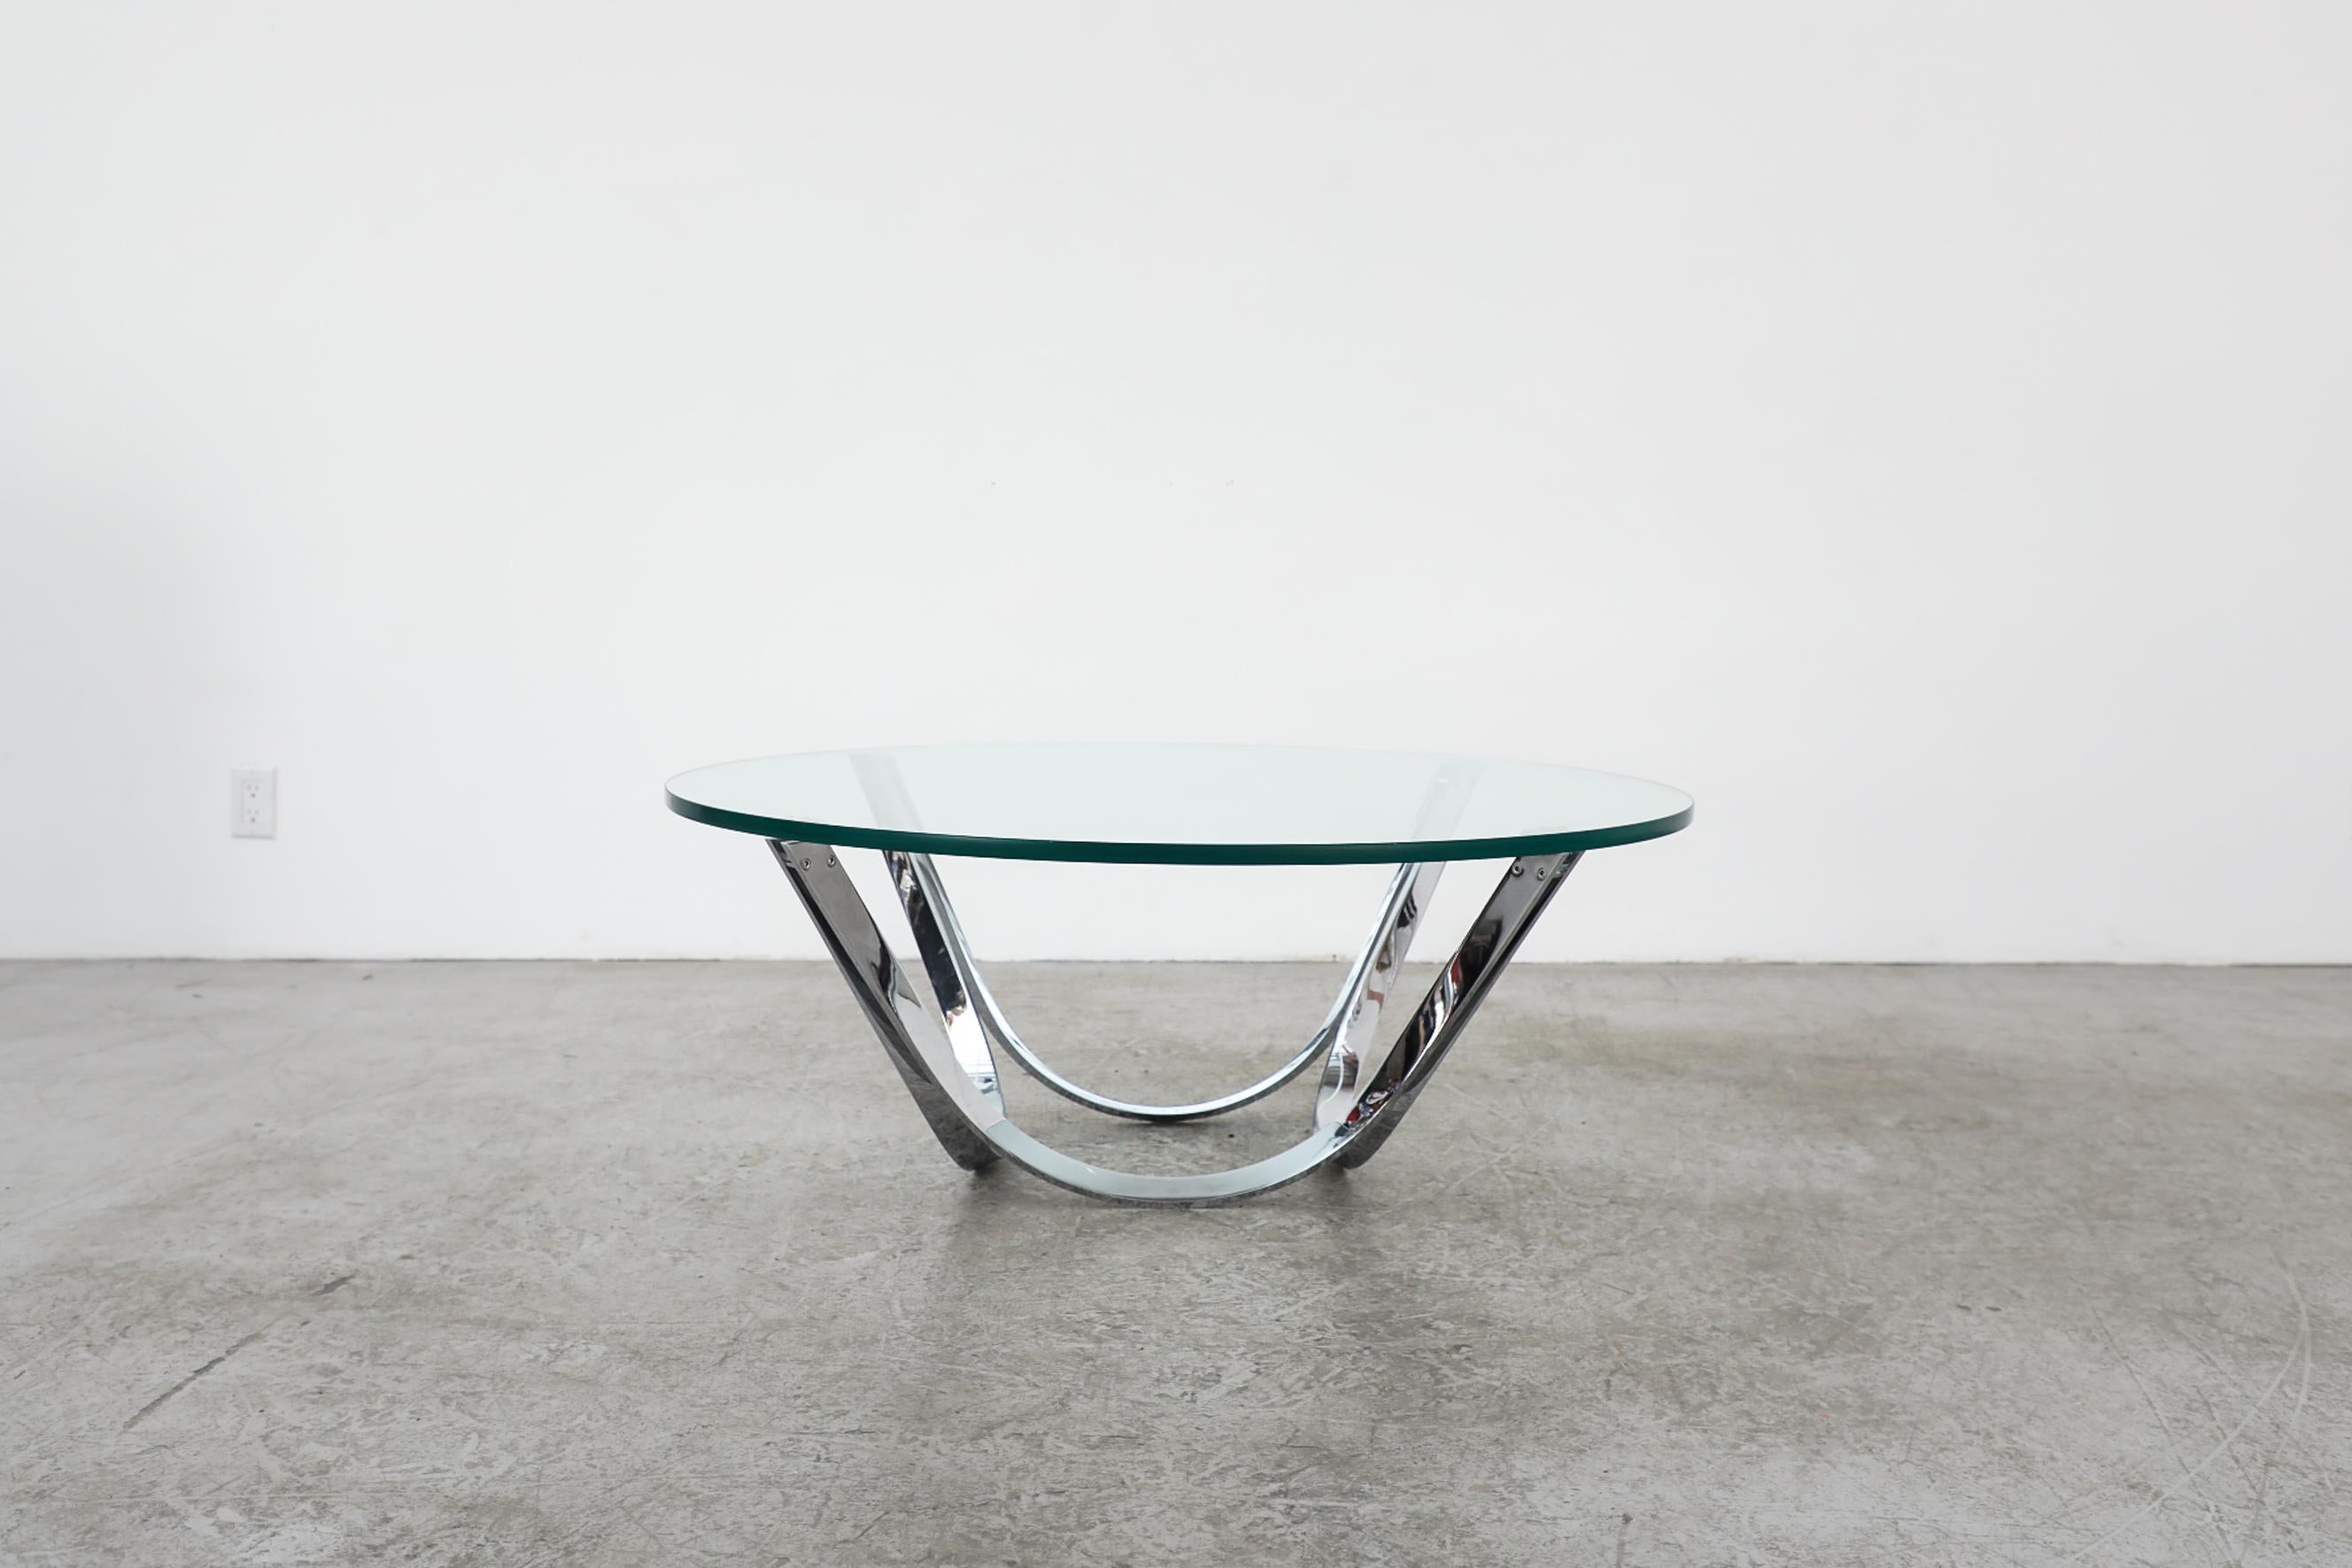 This Mod 1970's coffee table has a striking, heavy chrome frame with curved legs and a thick plate glass top. It's in original condition with visible wear, including some scratches and chips on the glass. Wear is consistent with its age and use.